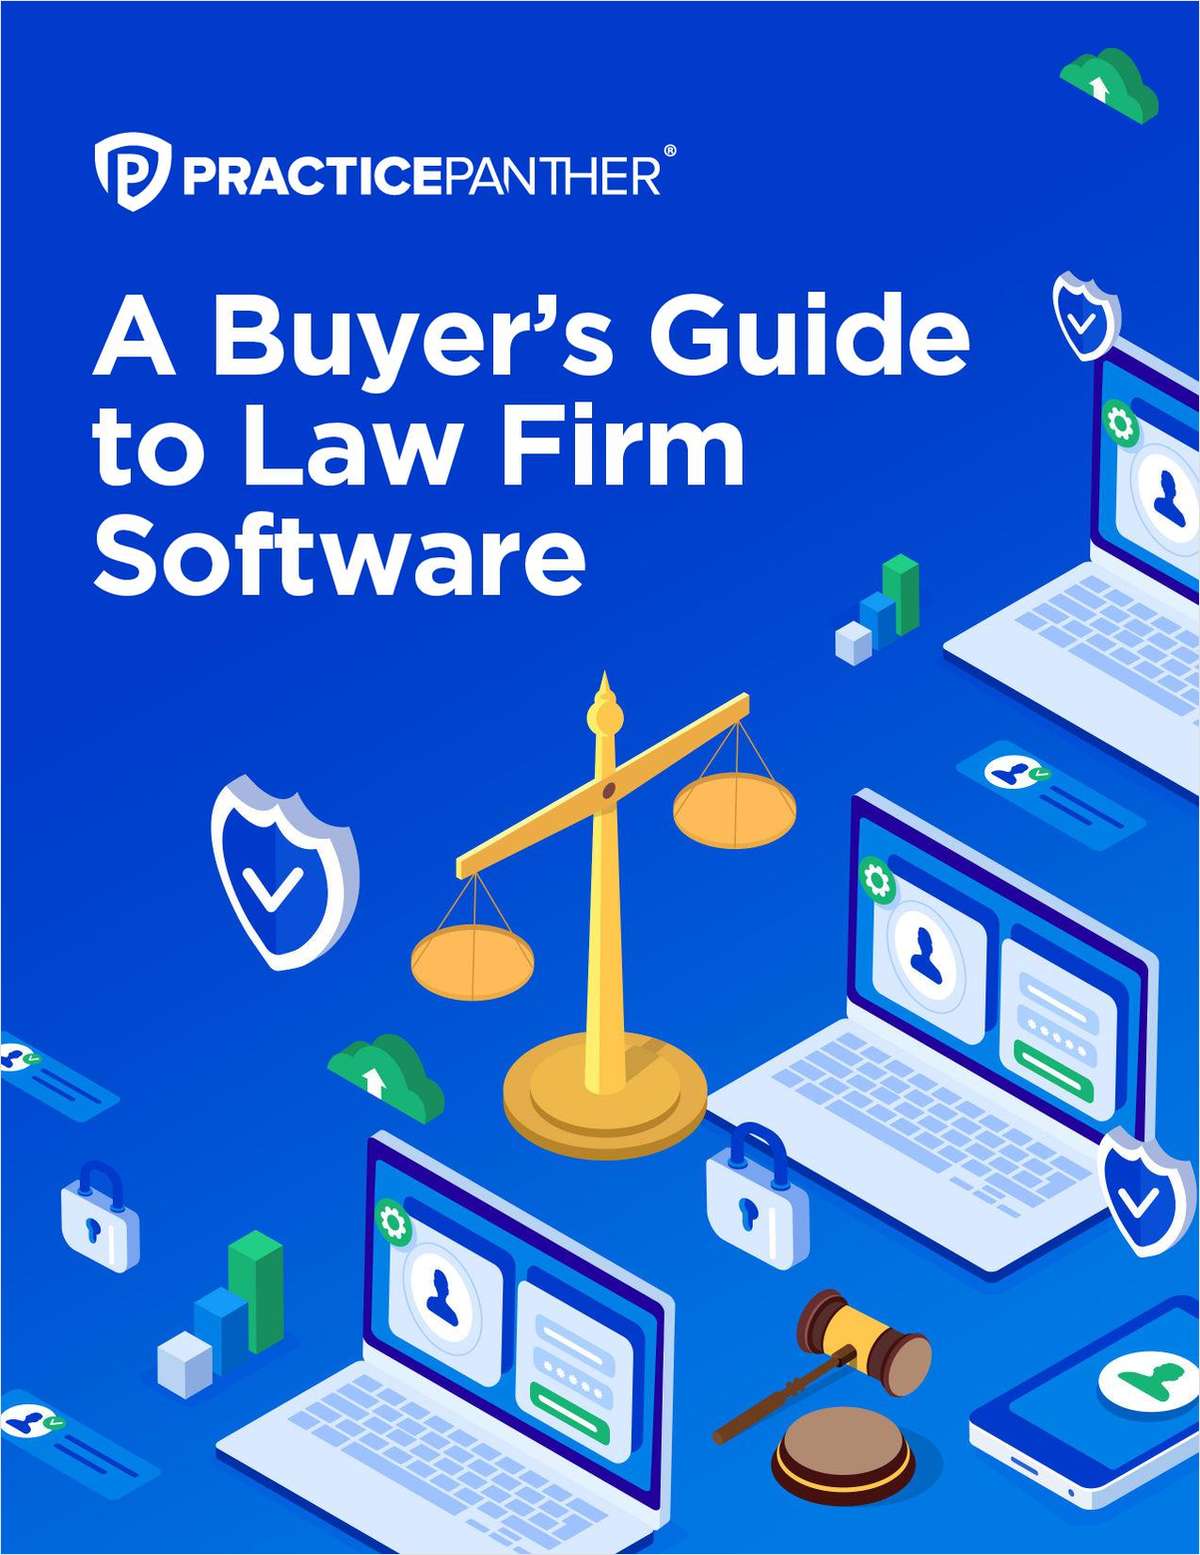 A Buyer's Guide to Law Firm Software